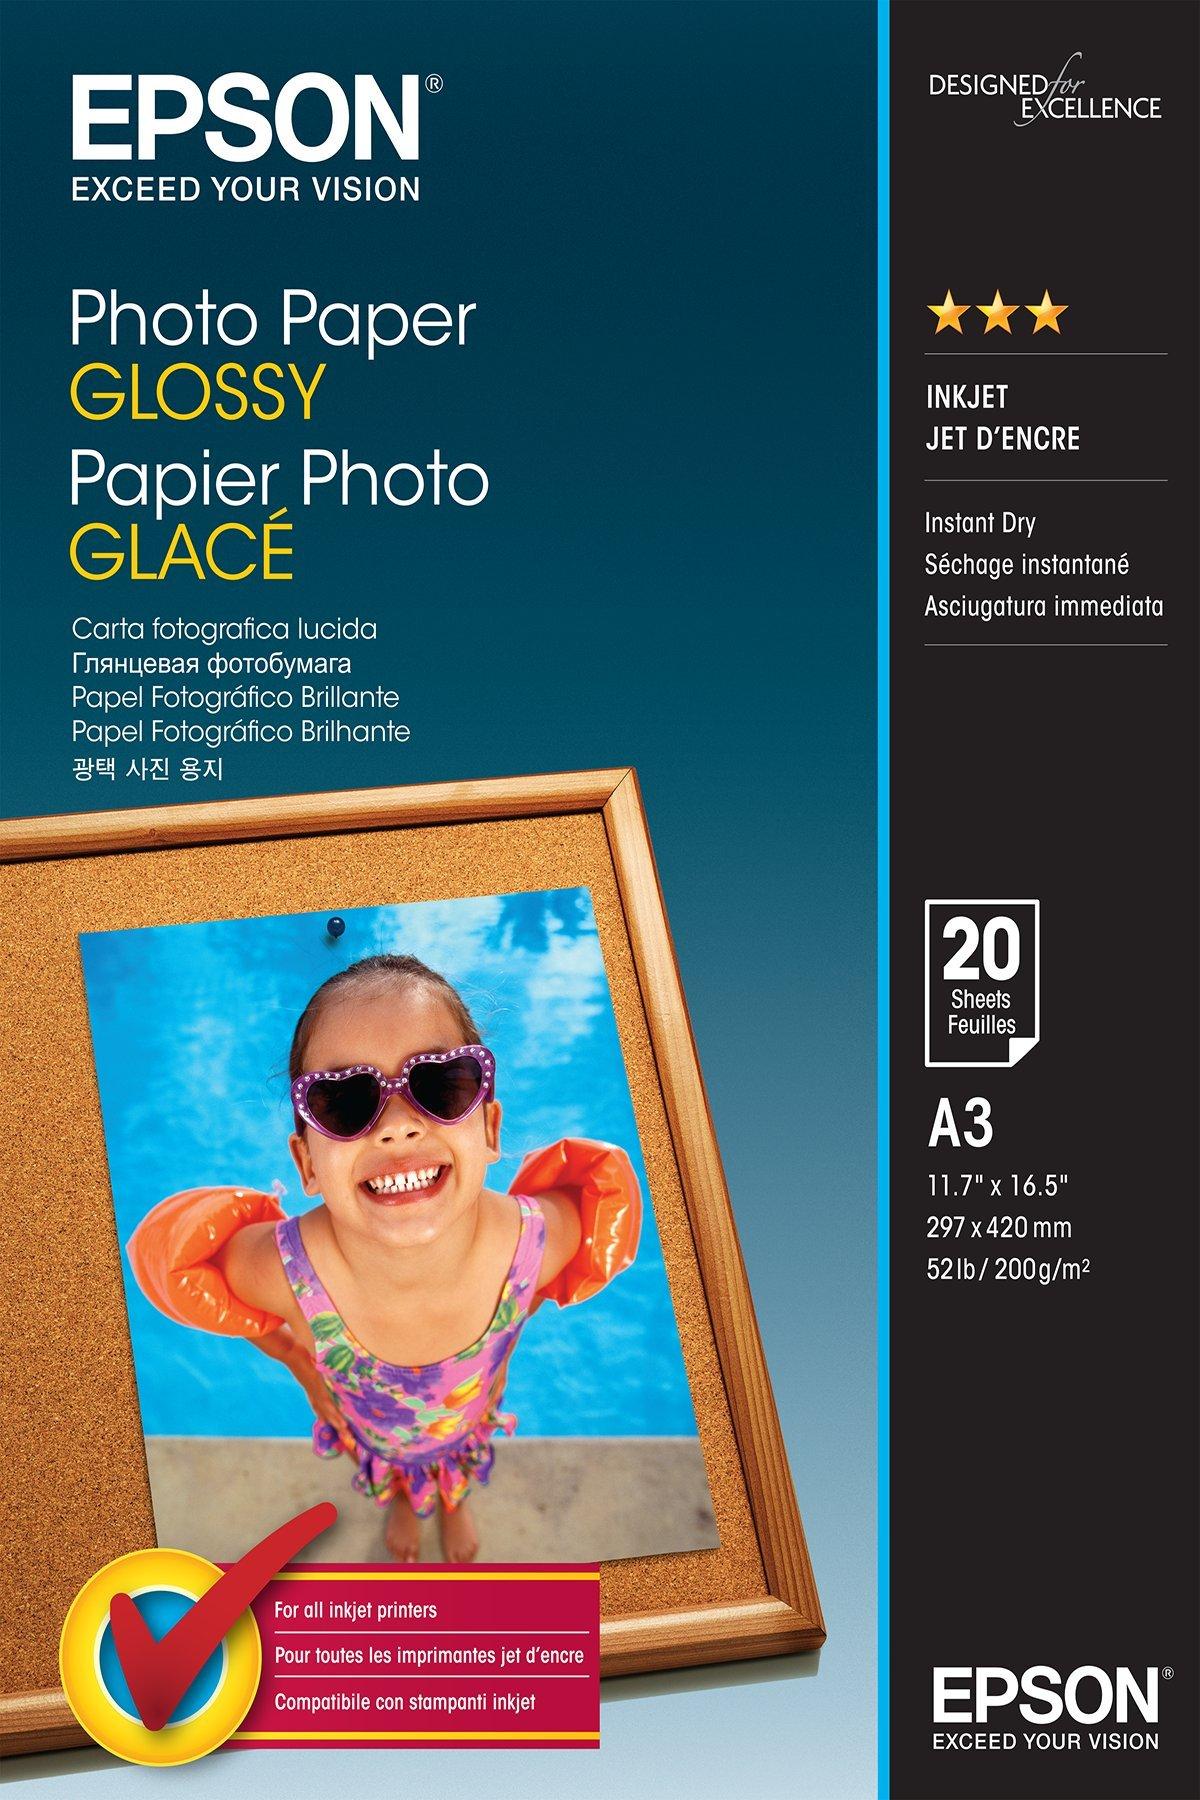 https://i8.amplience.net/i/epsonemear/c13s042536-photo-paper-glossy-a3-20-sheets?$product-xlarge$&img404=missing_product&v=1